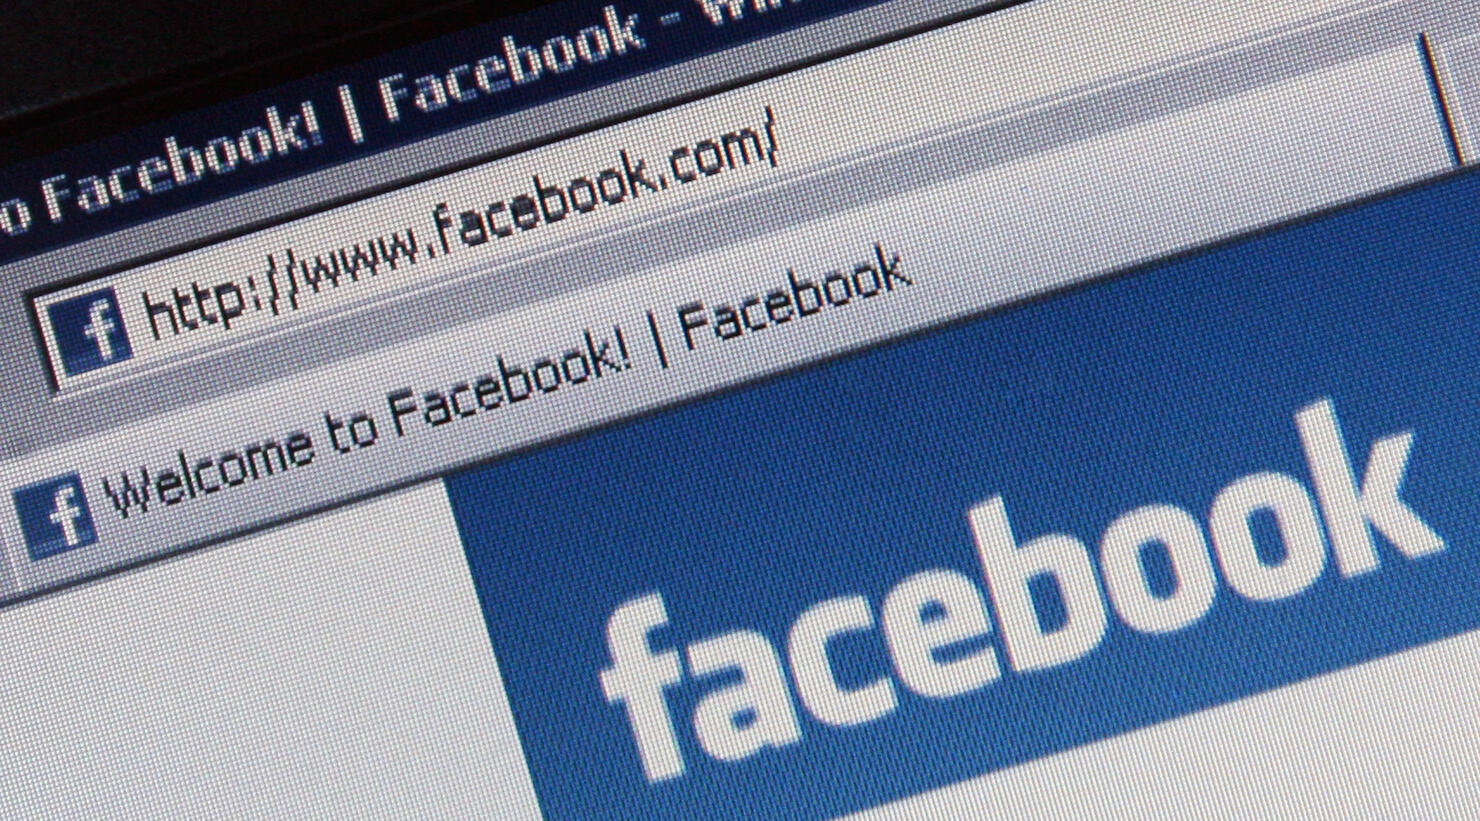 Facebook wants your naked photos